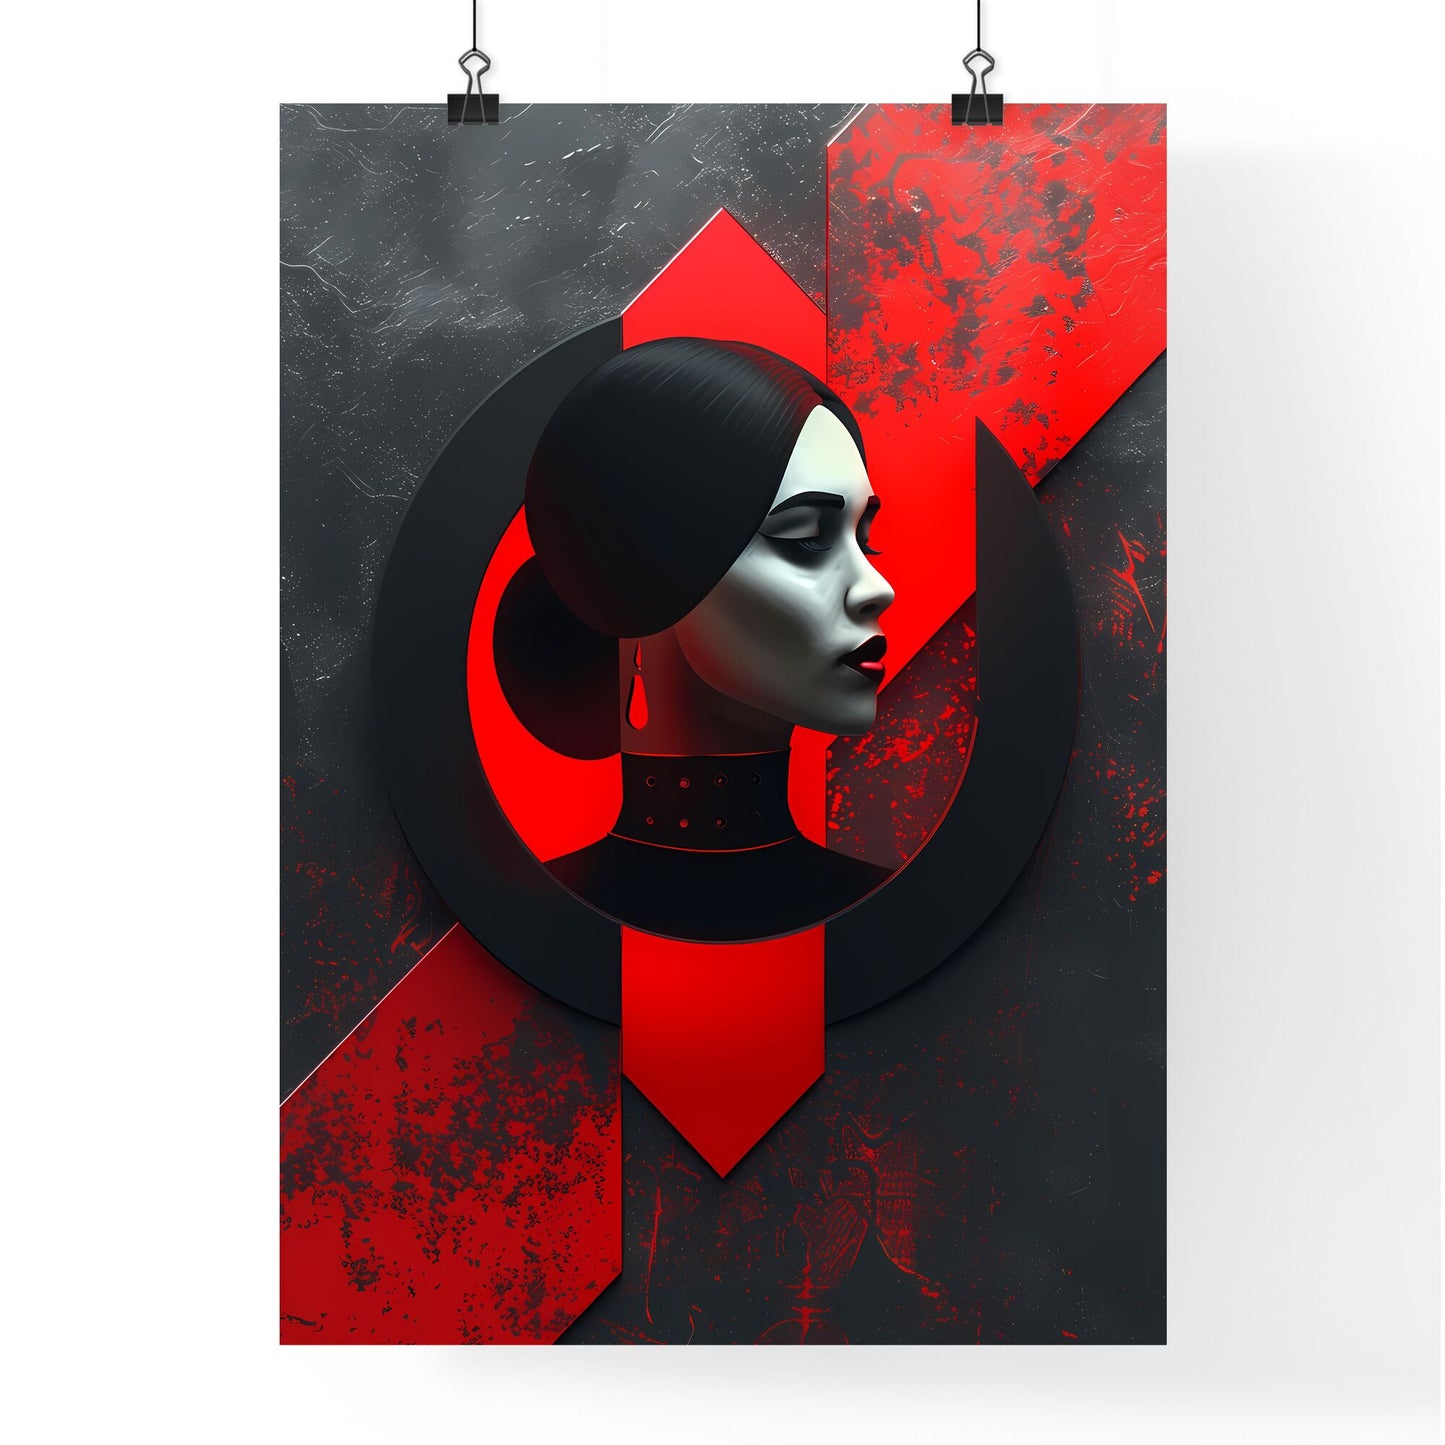 Minimal Black and Red Geometric Logo featuring a Vibrant Female Artwork: Simplistic yet Striking and Eye-catching Design Default Title